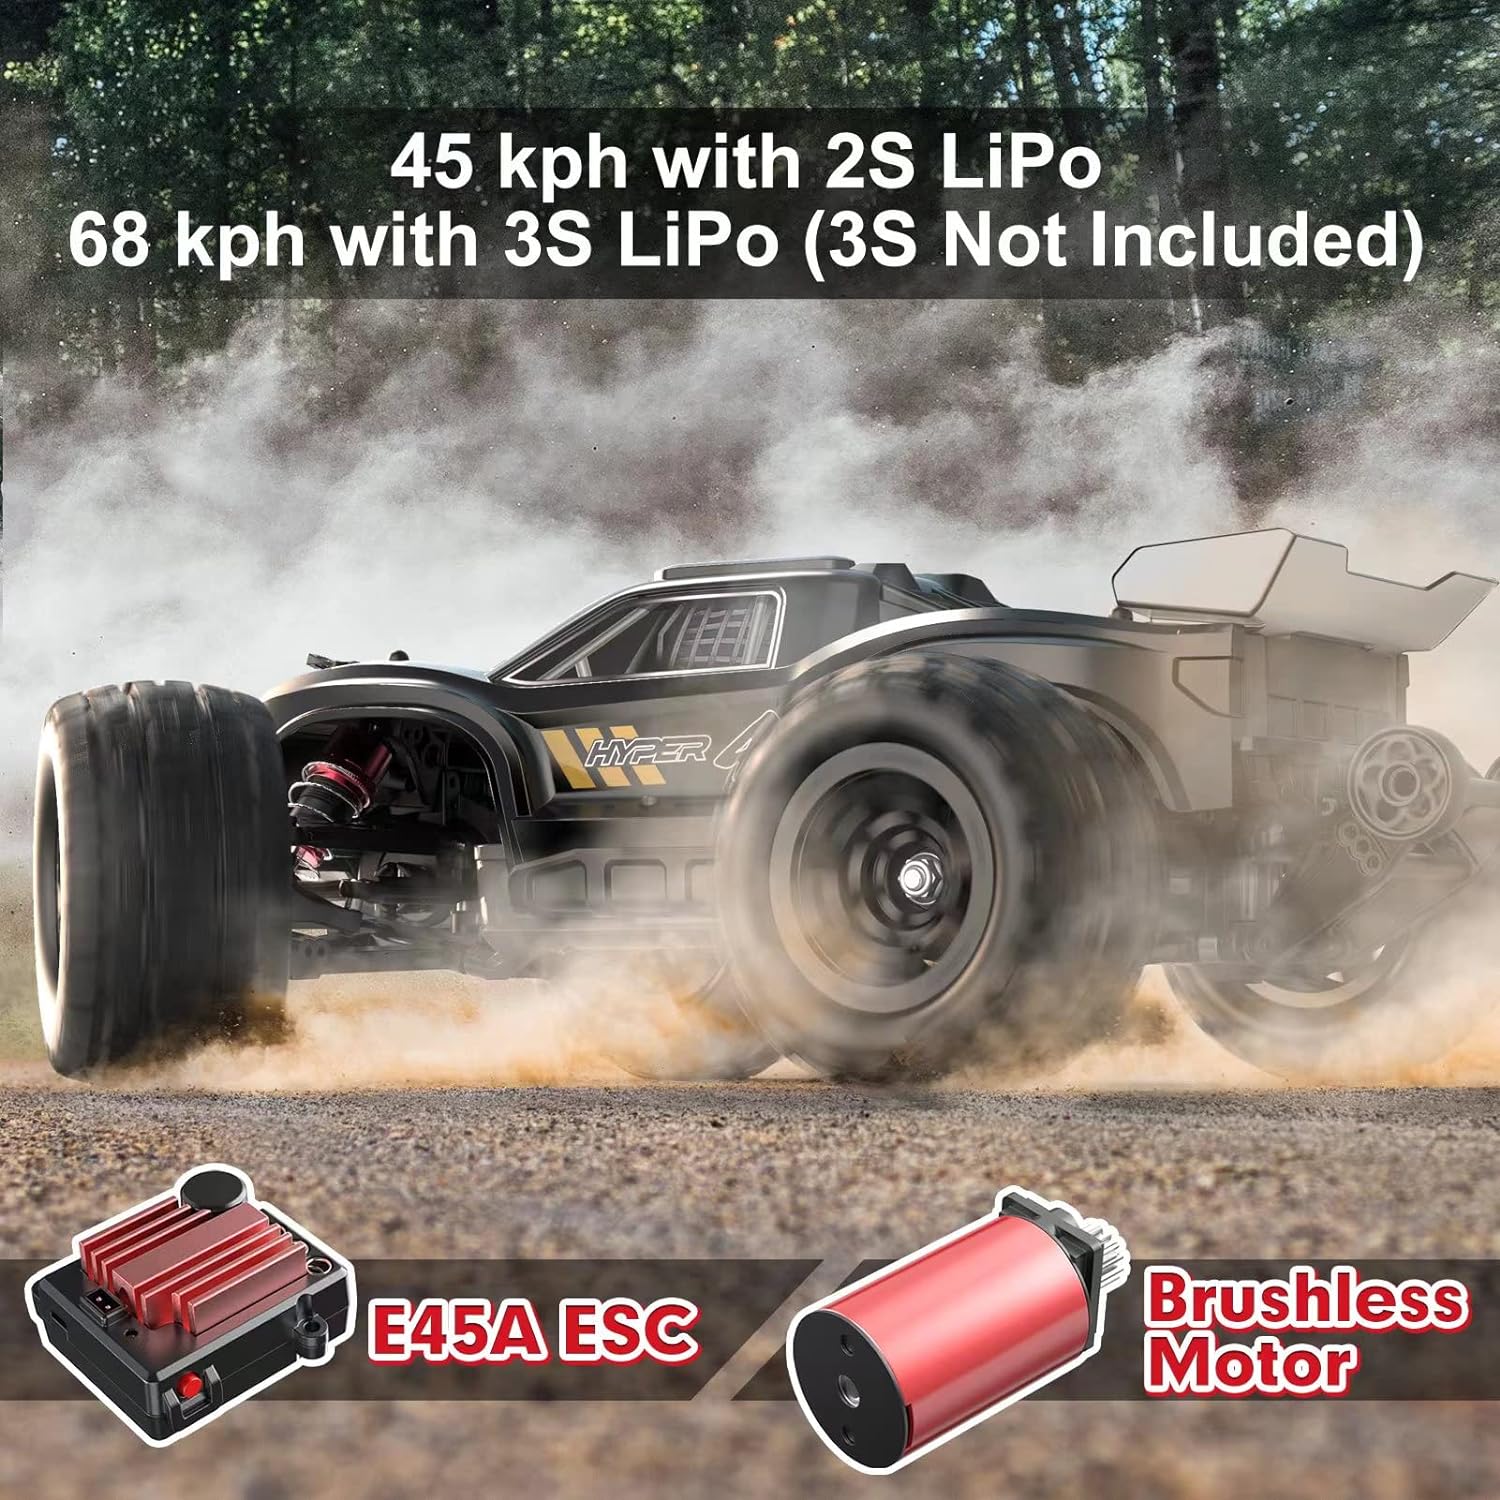 Hyper Go Brushless Fast RC Cars Max 42mph Electric Off-Road RC Truck